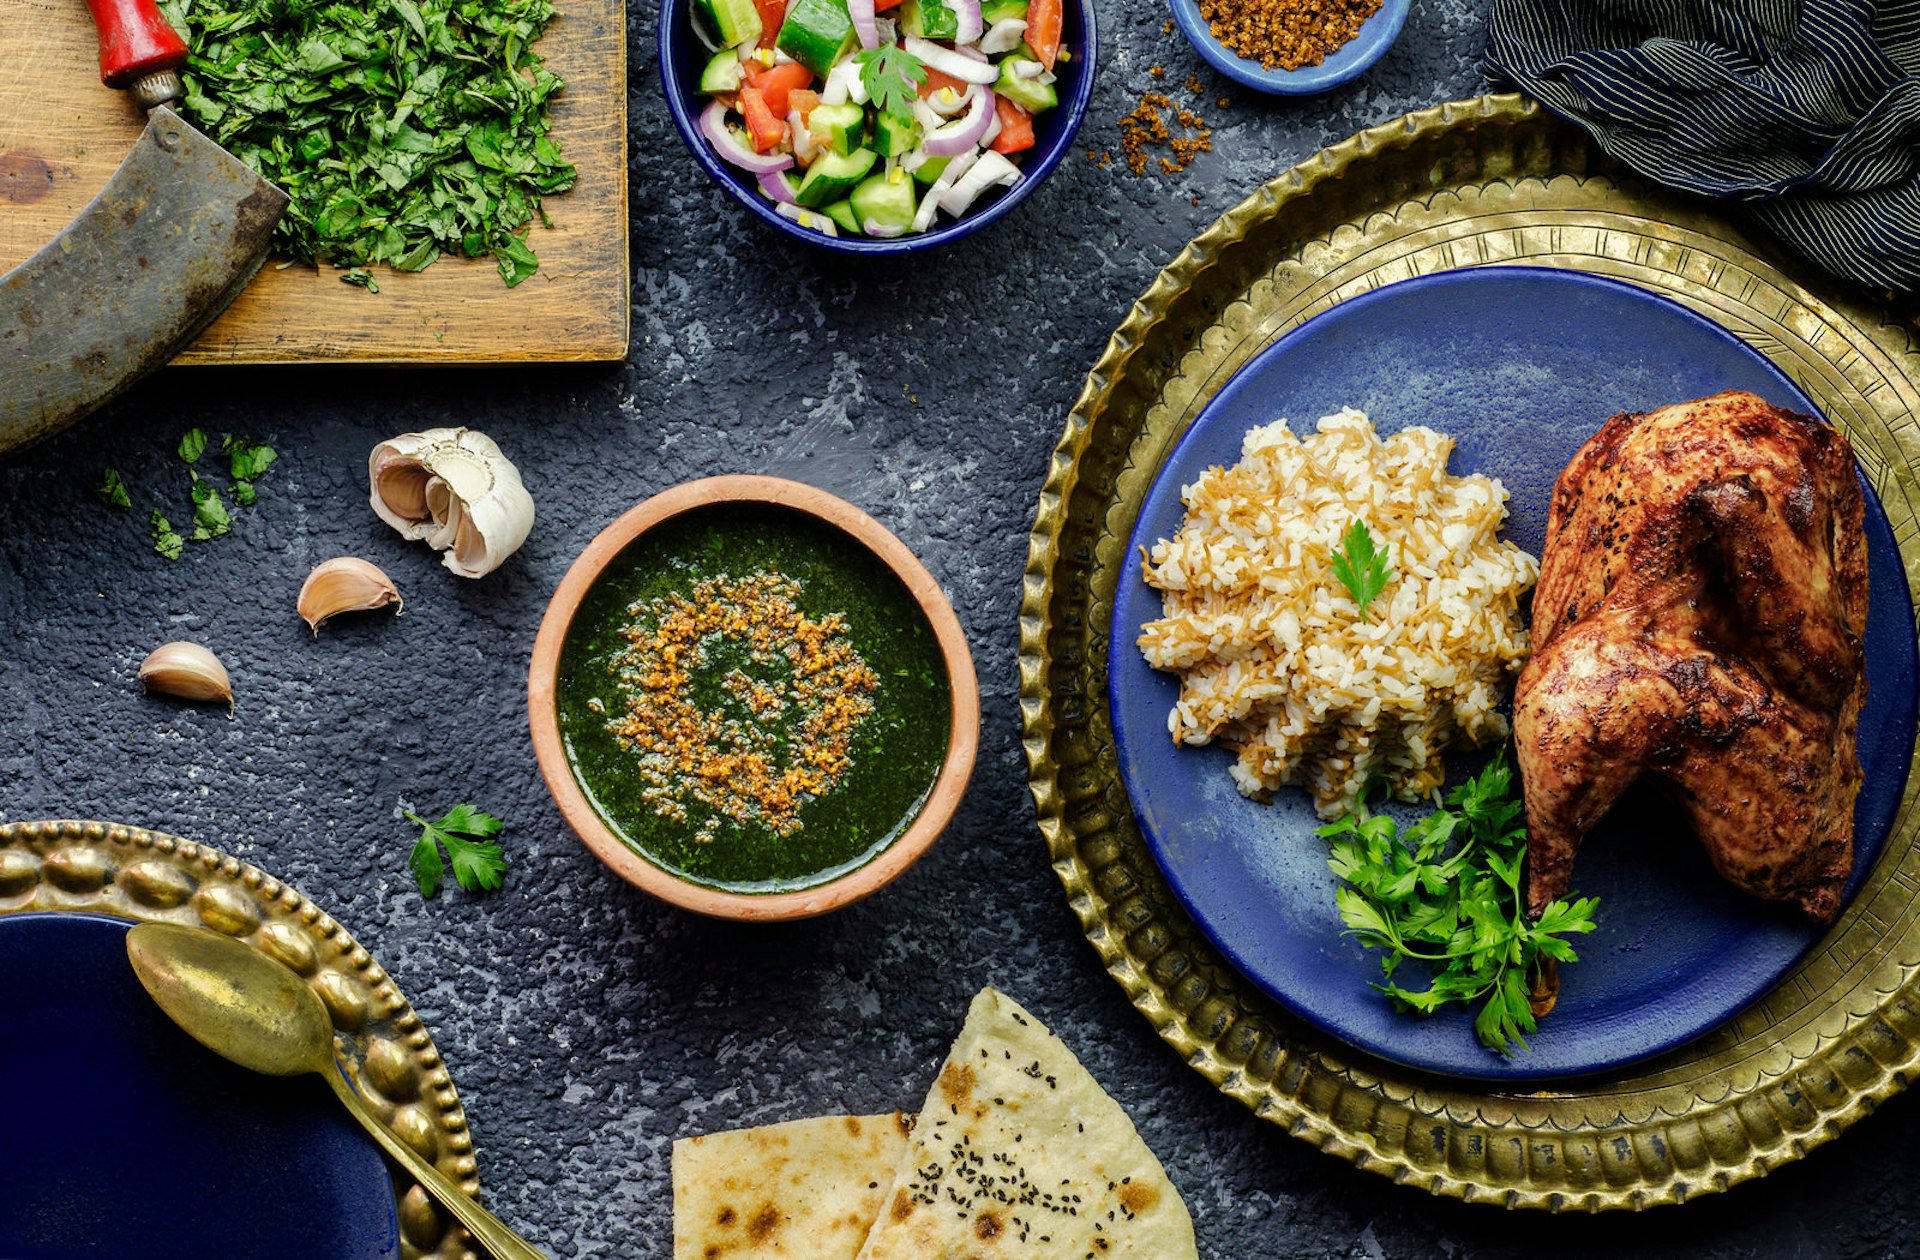 Egyptian dish of molokhiyya placed with rice, chicken, pita bread and green salad © Dina Saeed / Shutterstock